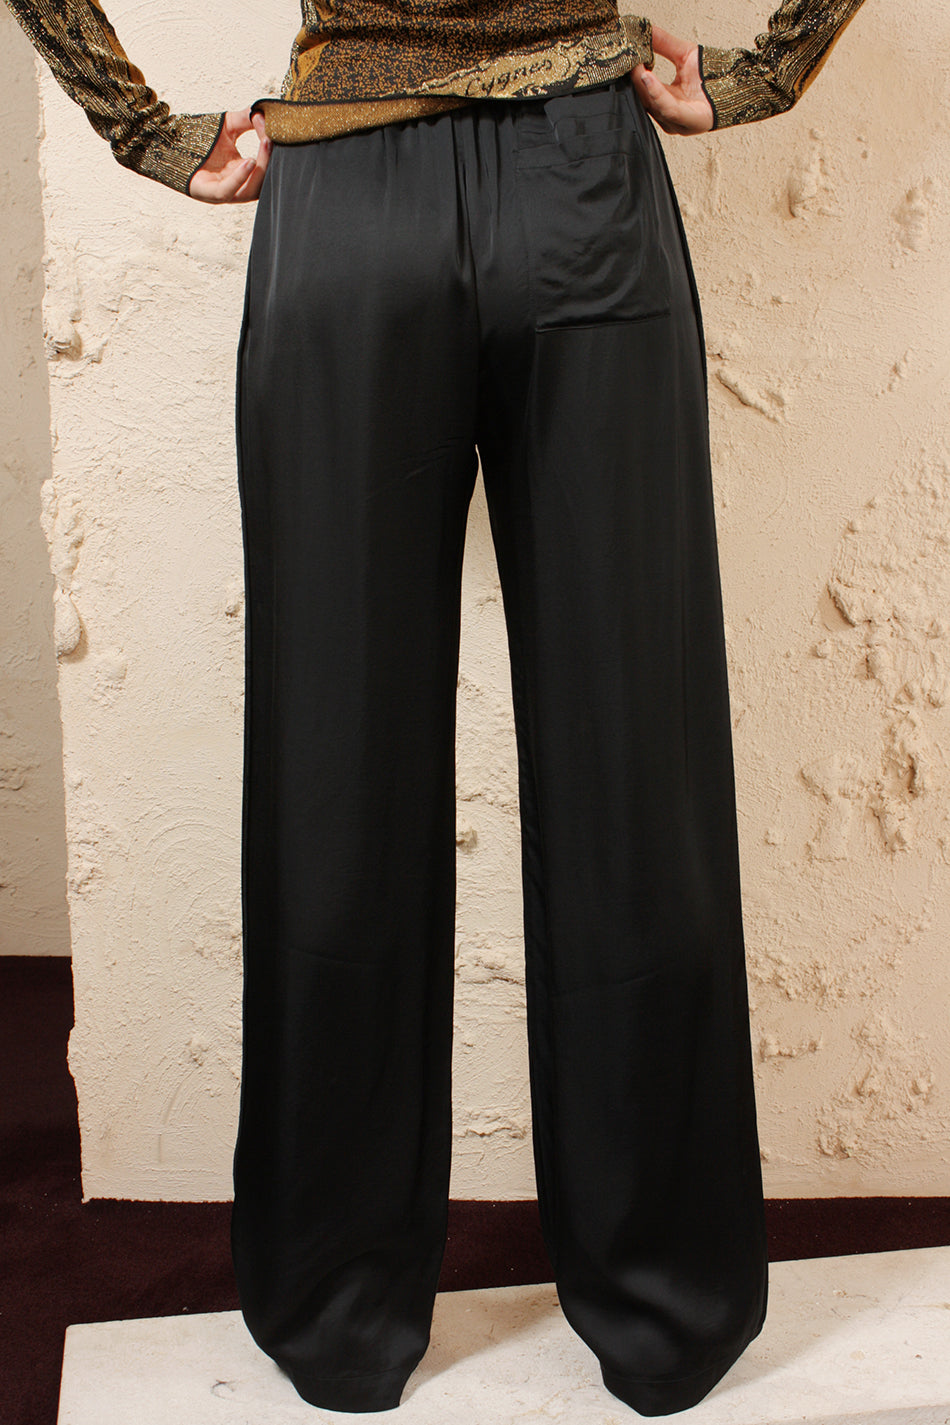 Pernelle Satin Trousers